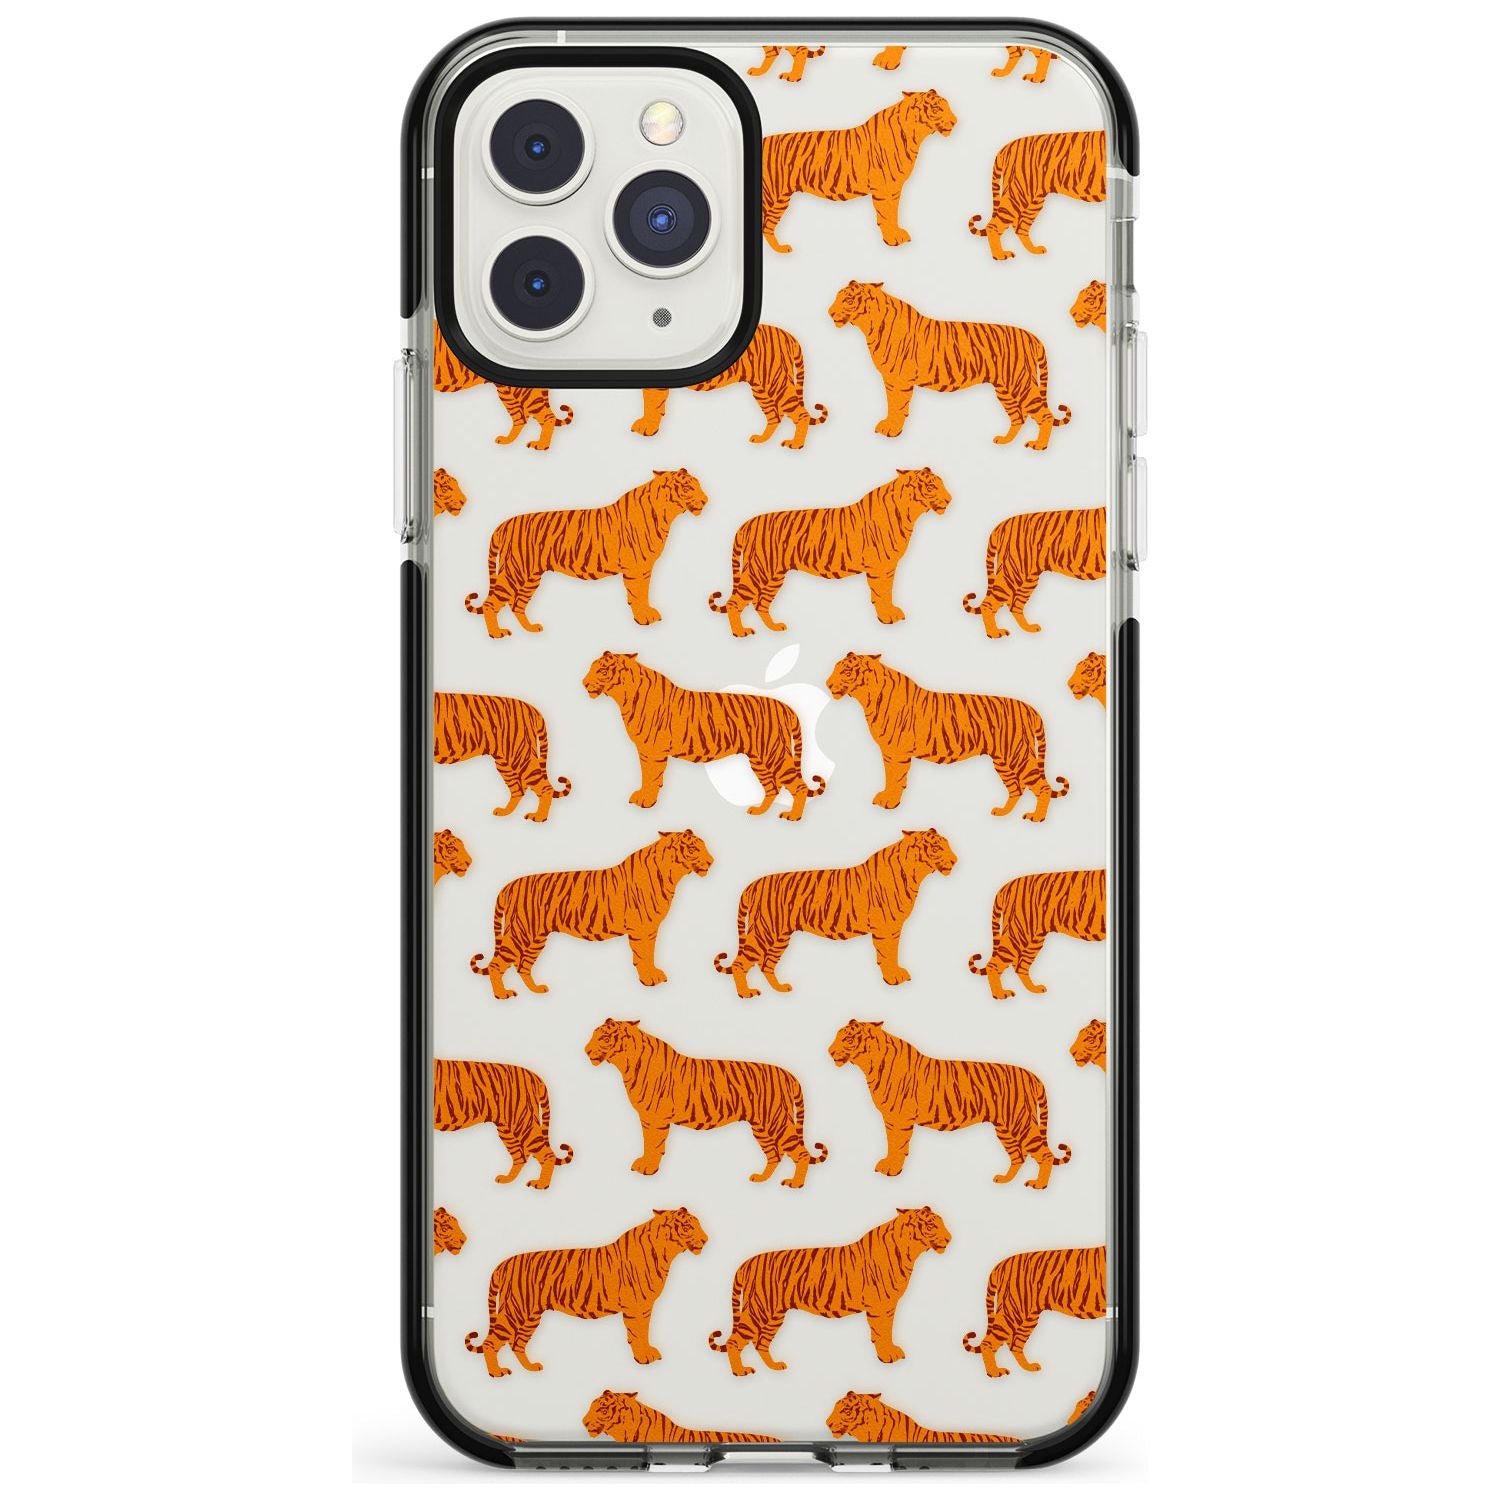 Tigers on Clear Pattern Black Impact Phone Case for iPhone 11 Pro Max